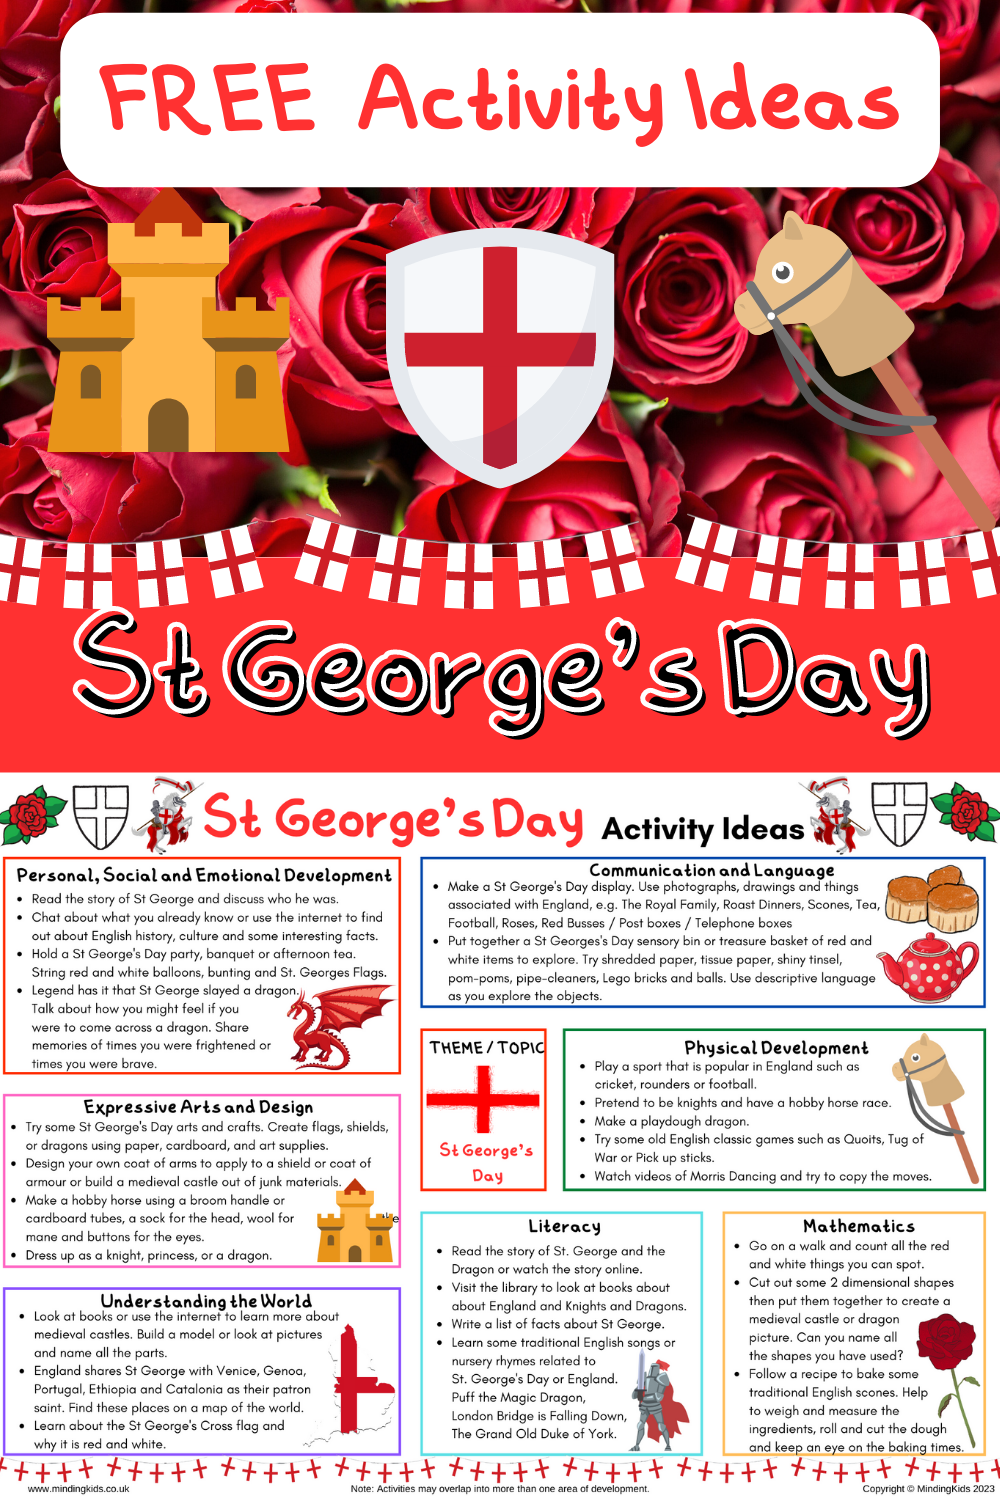 St George's Day Activity Ideas